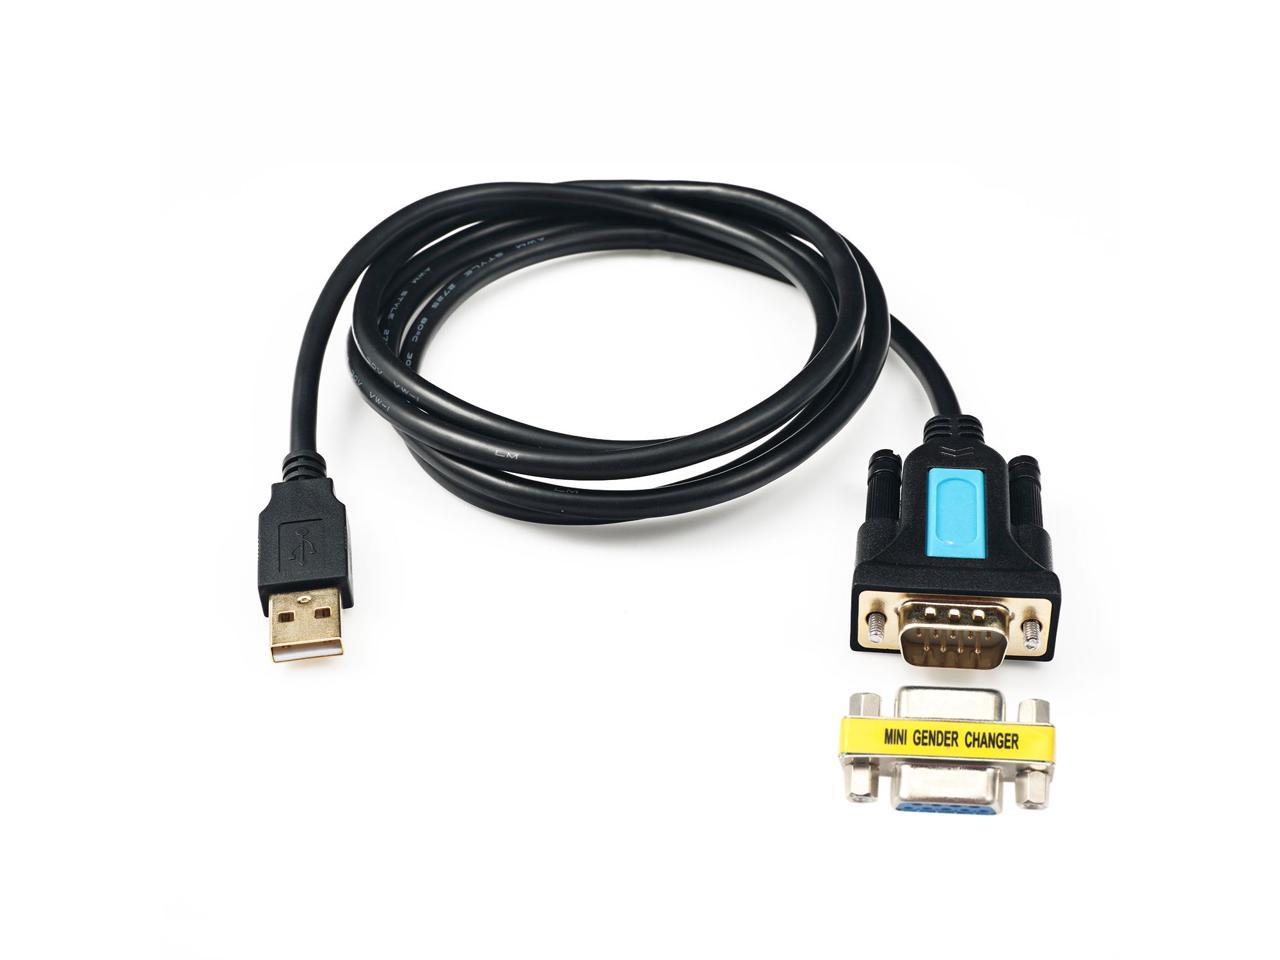 RS-232\DB9 Female Connector, Prolific PL2303HX Rev. D Chipset Mac Linux Plugable USB to Serial Adapter Compatible with Windows Renewed 